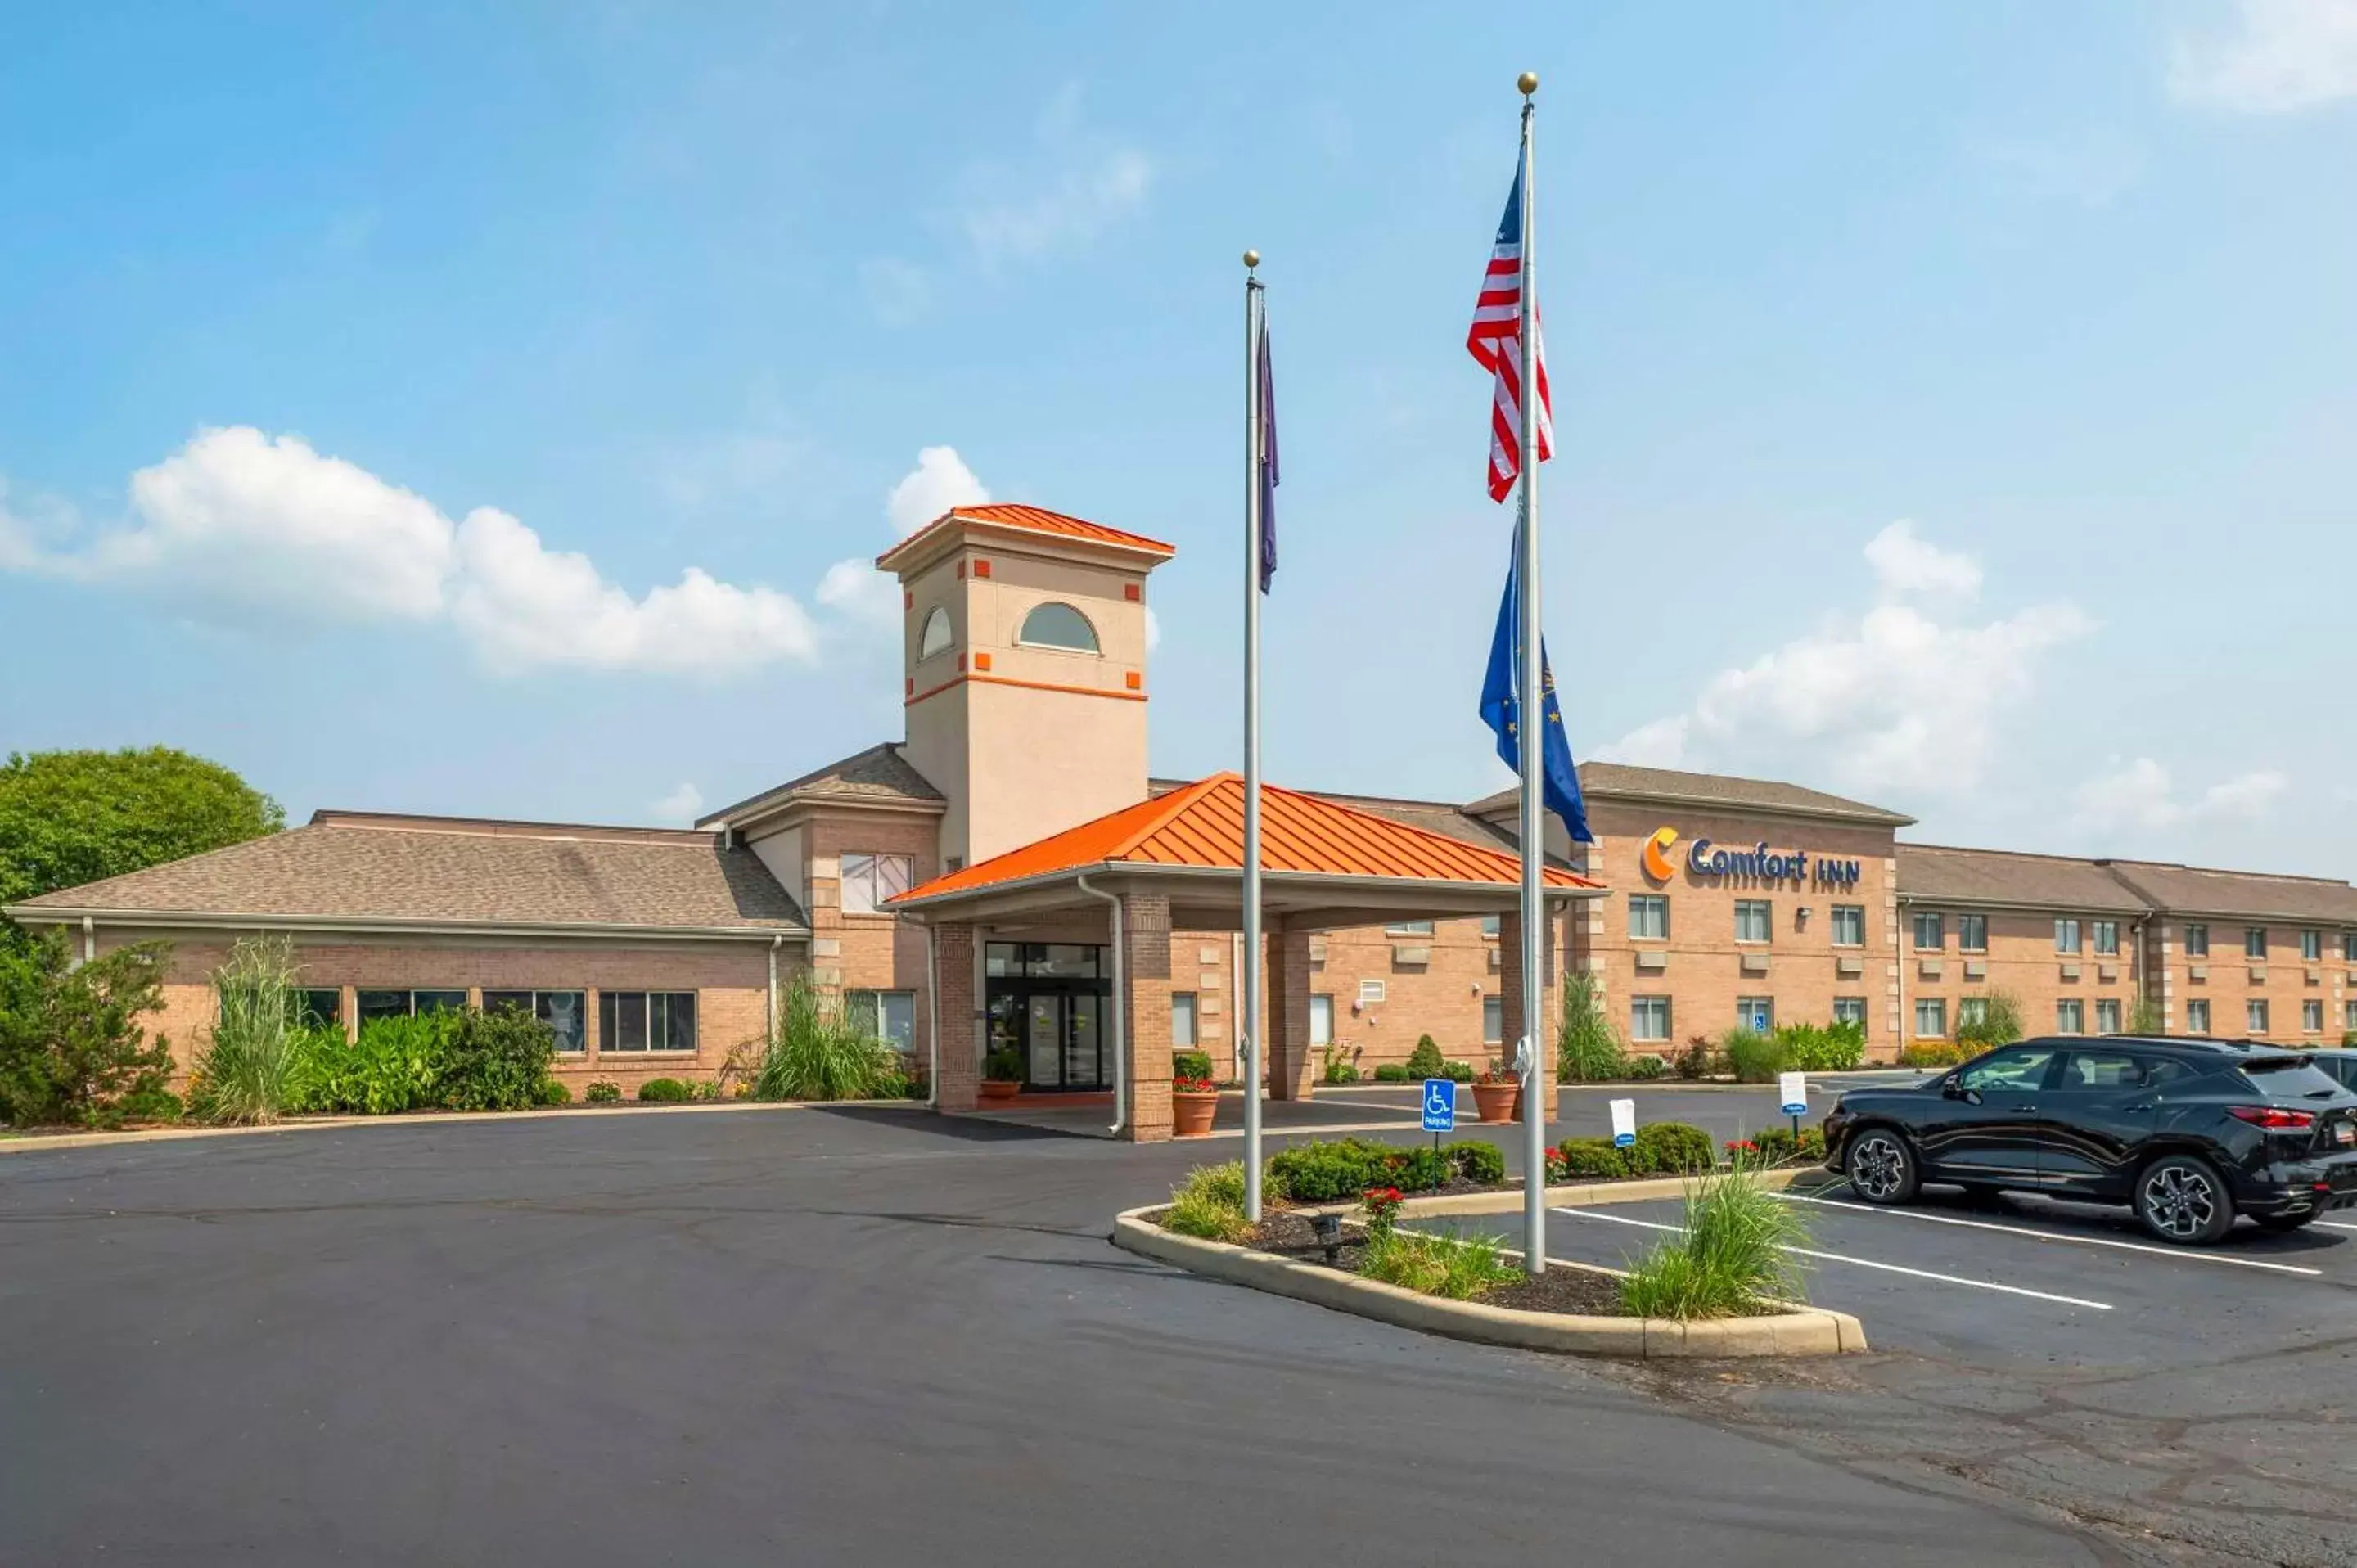 Property Building in Comfort Inn Near Indiana Premium Outlets